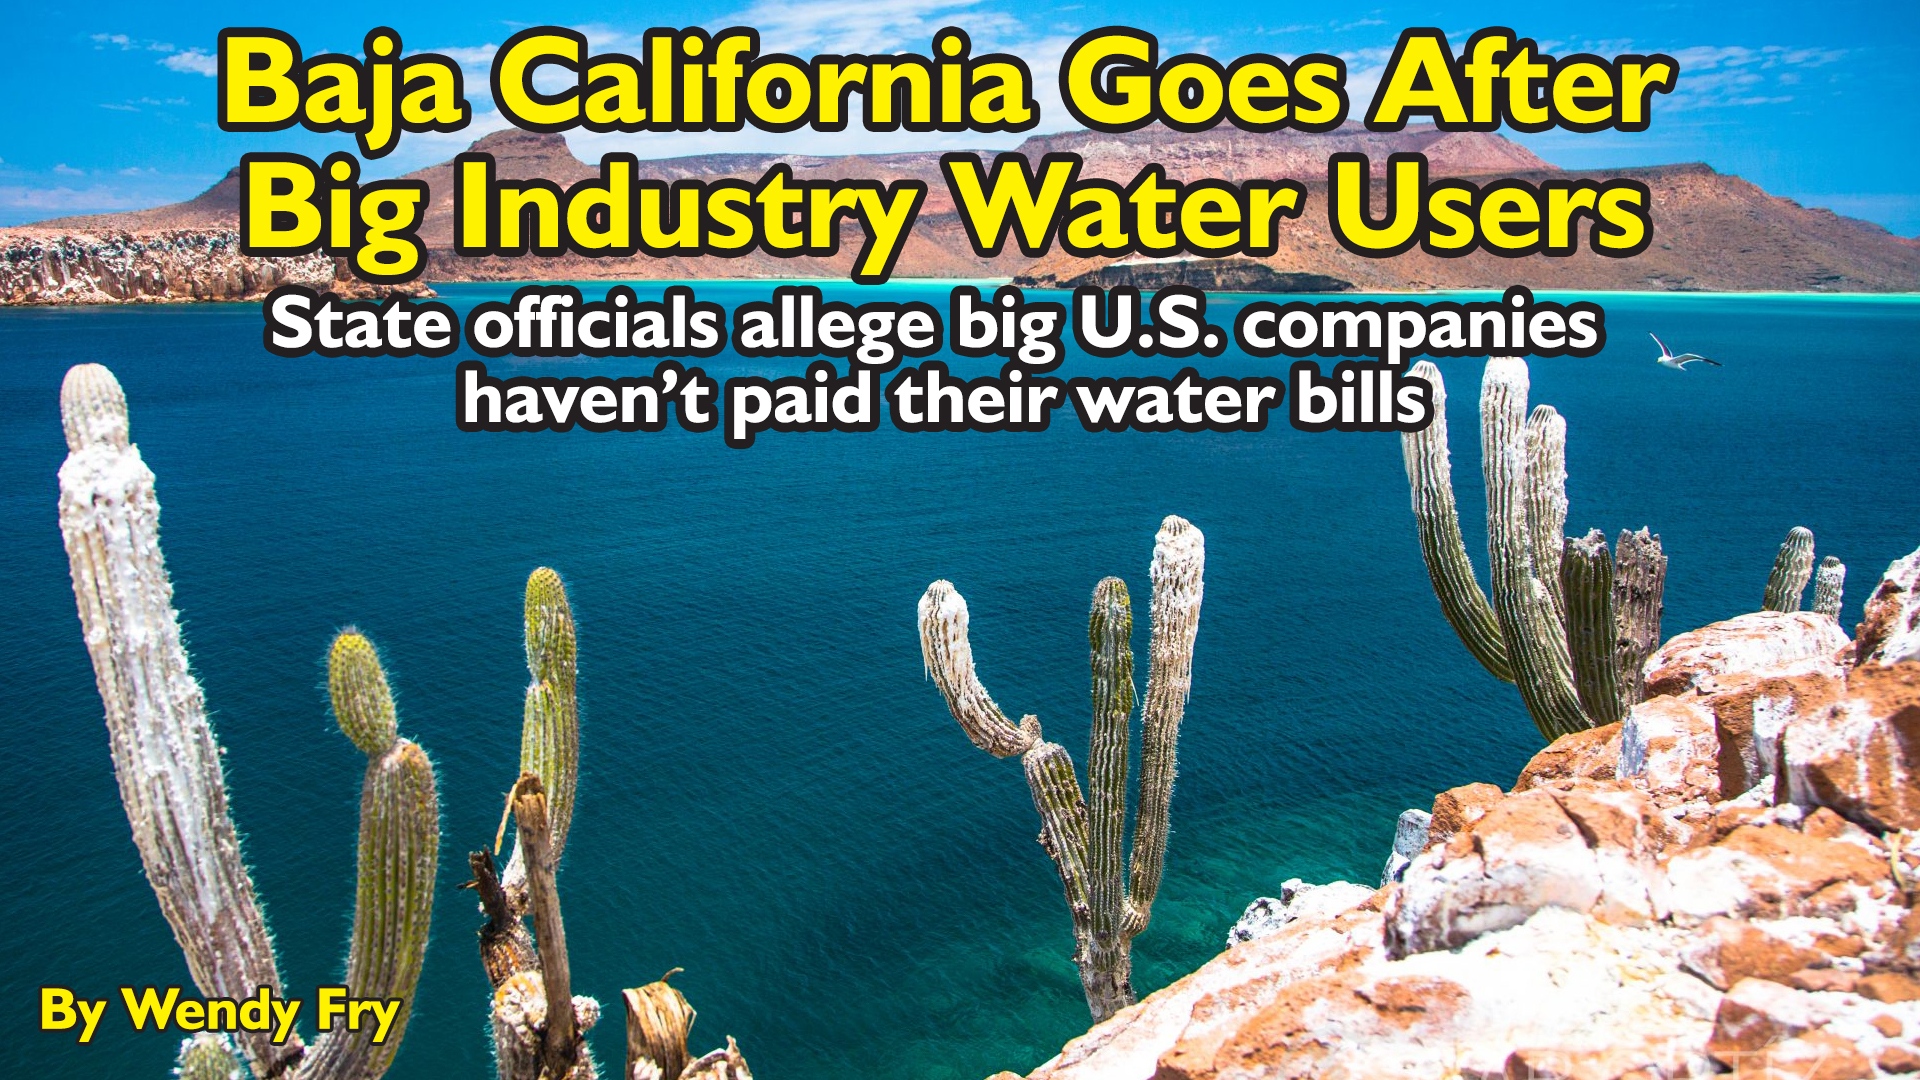 Baja California Goes After Big Industry Water Users